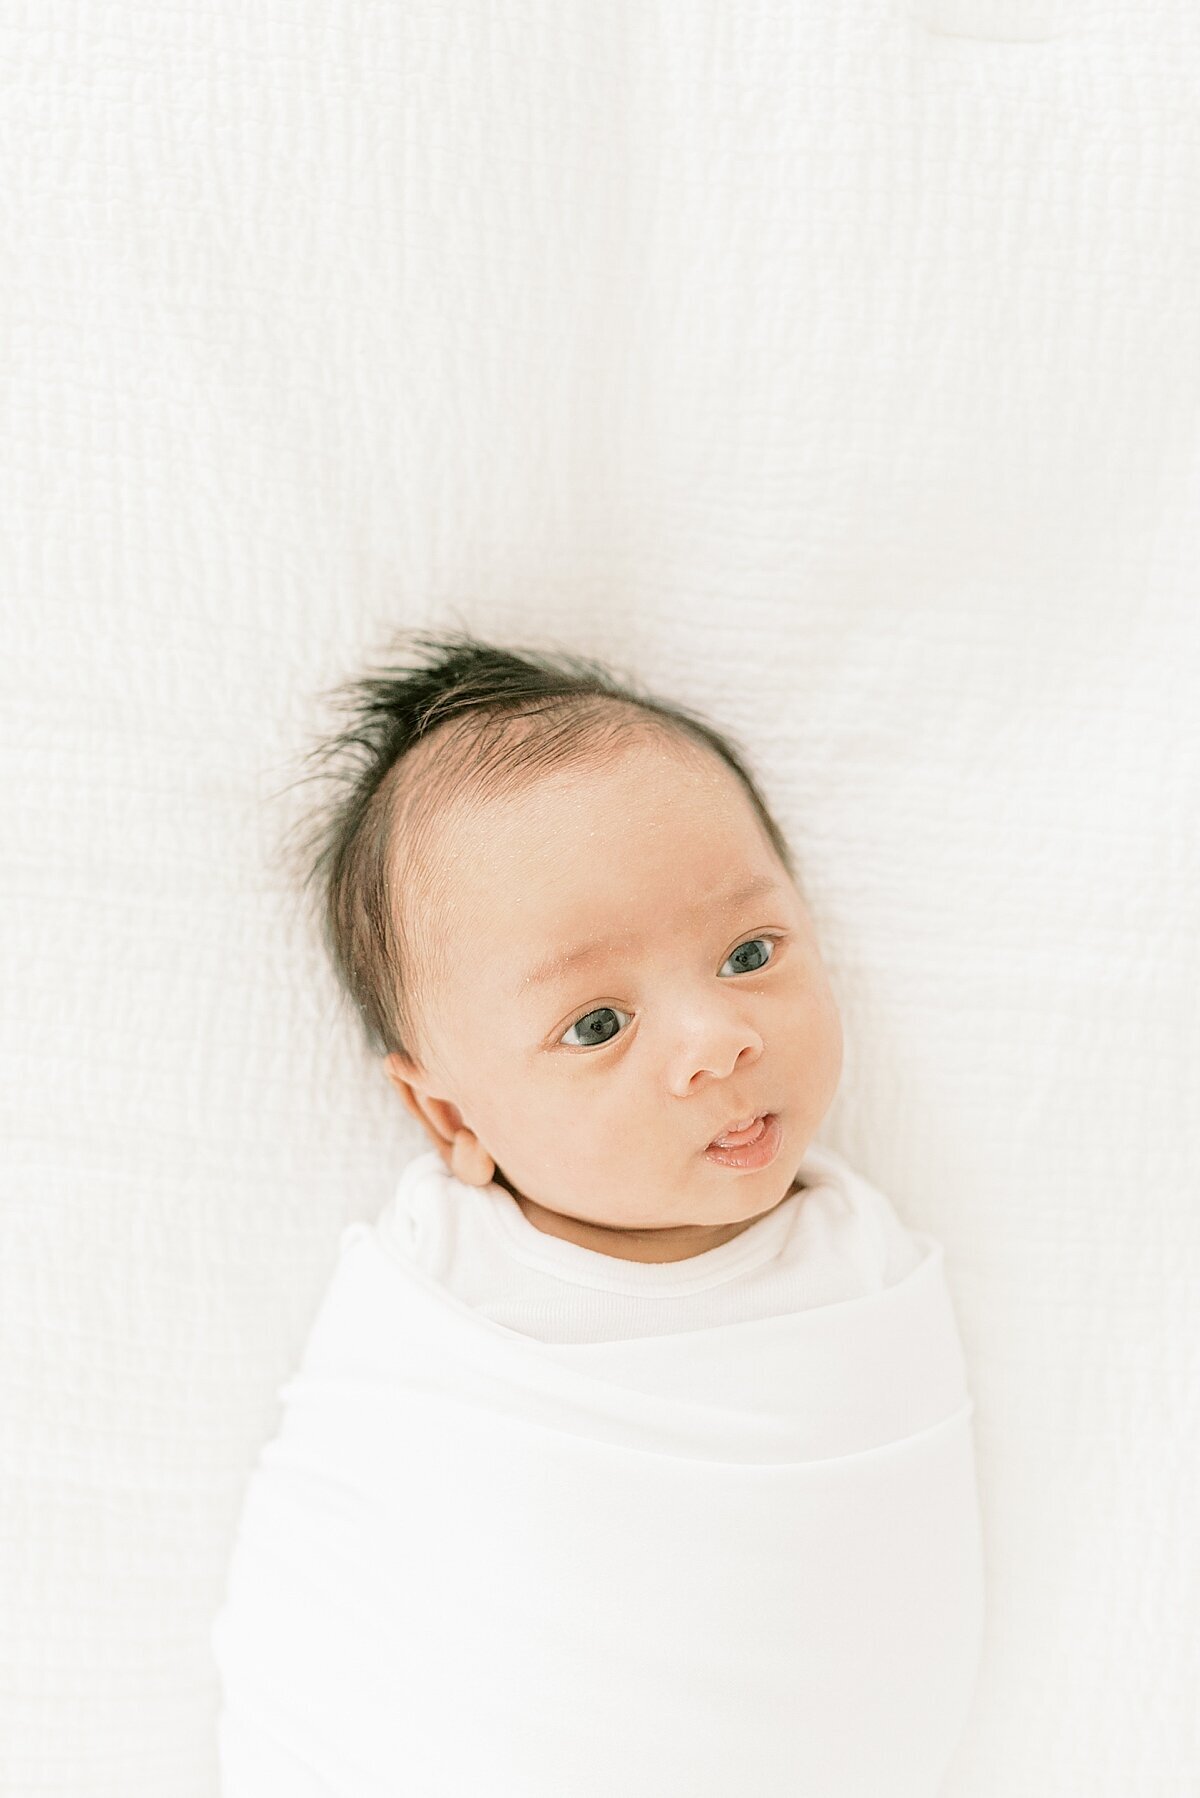 in-home-lifestyle-session-charleston-newborn-photographer-caitlyn-motycka-photography_0004